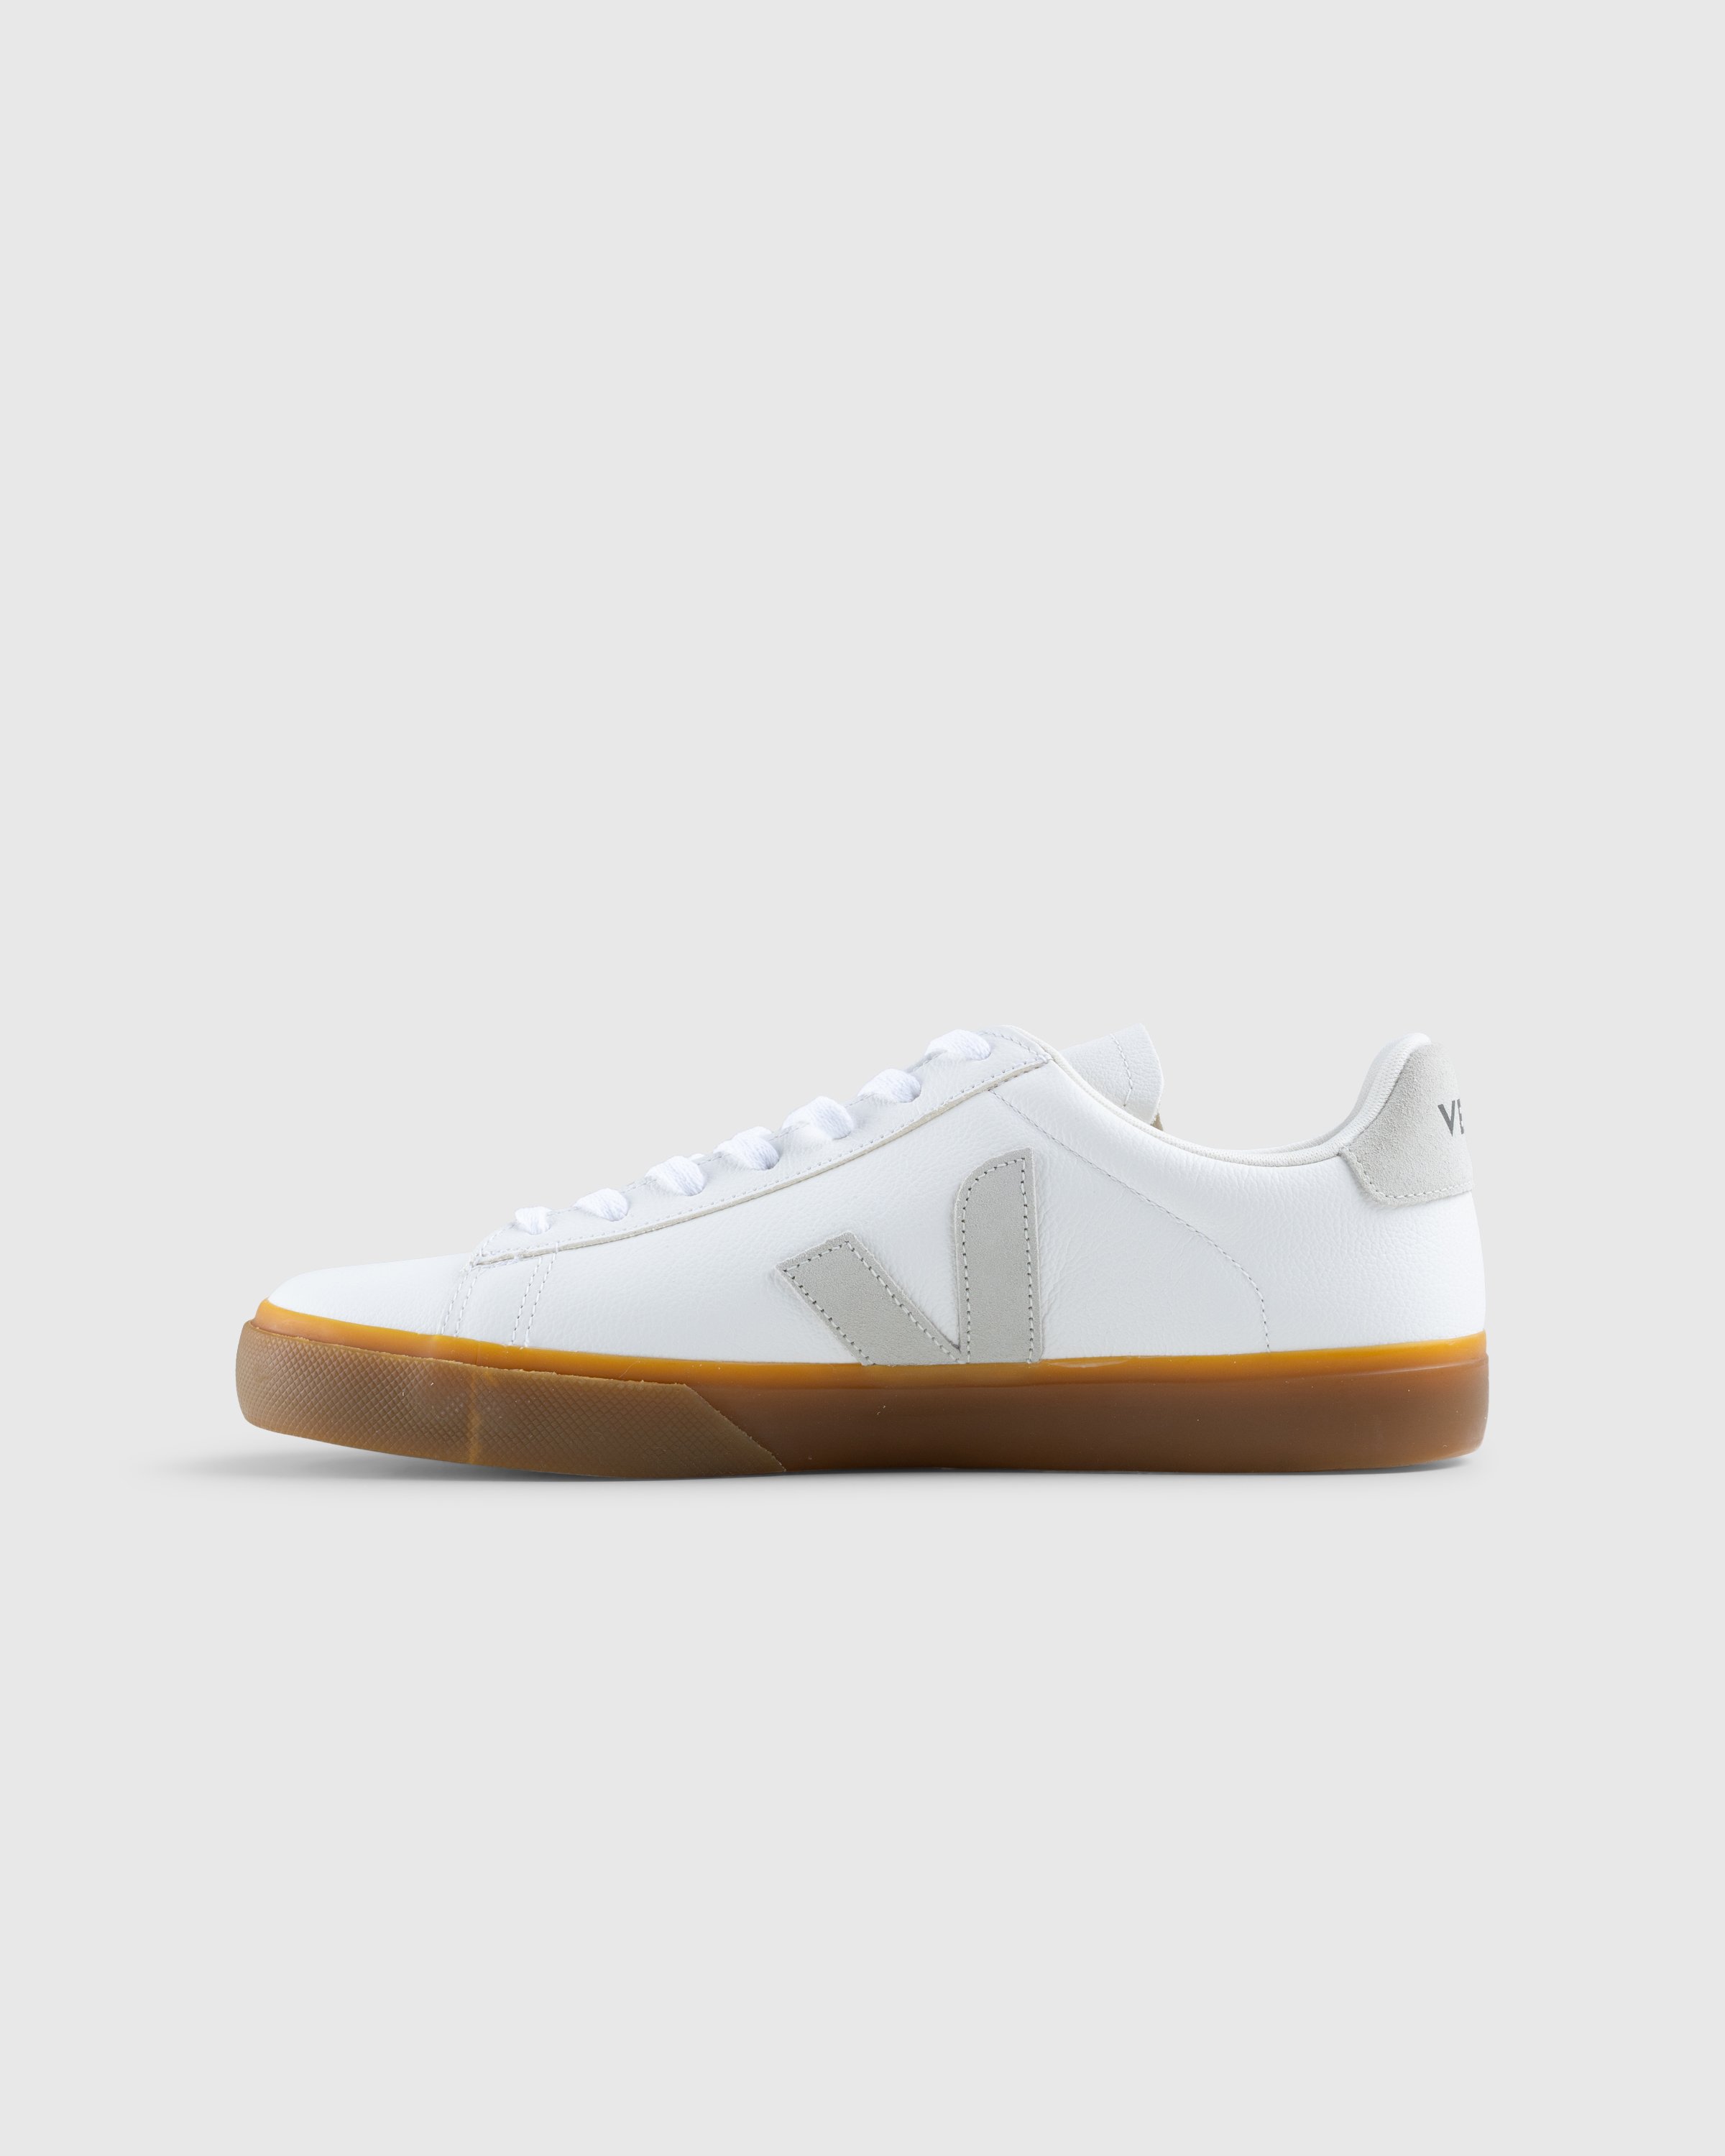 VEJA - Campo White/Natural - Footwear - White - Image 2